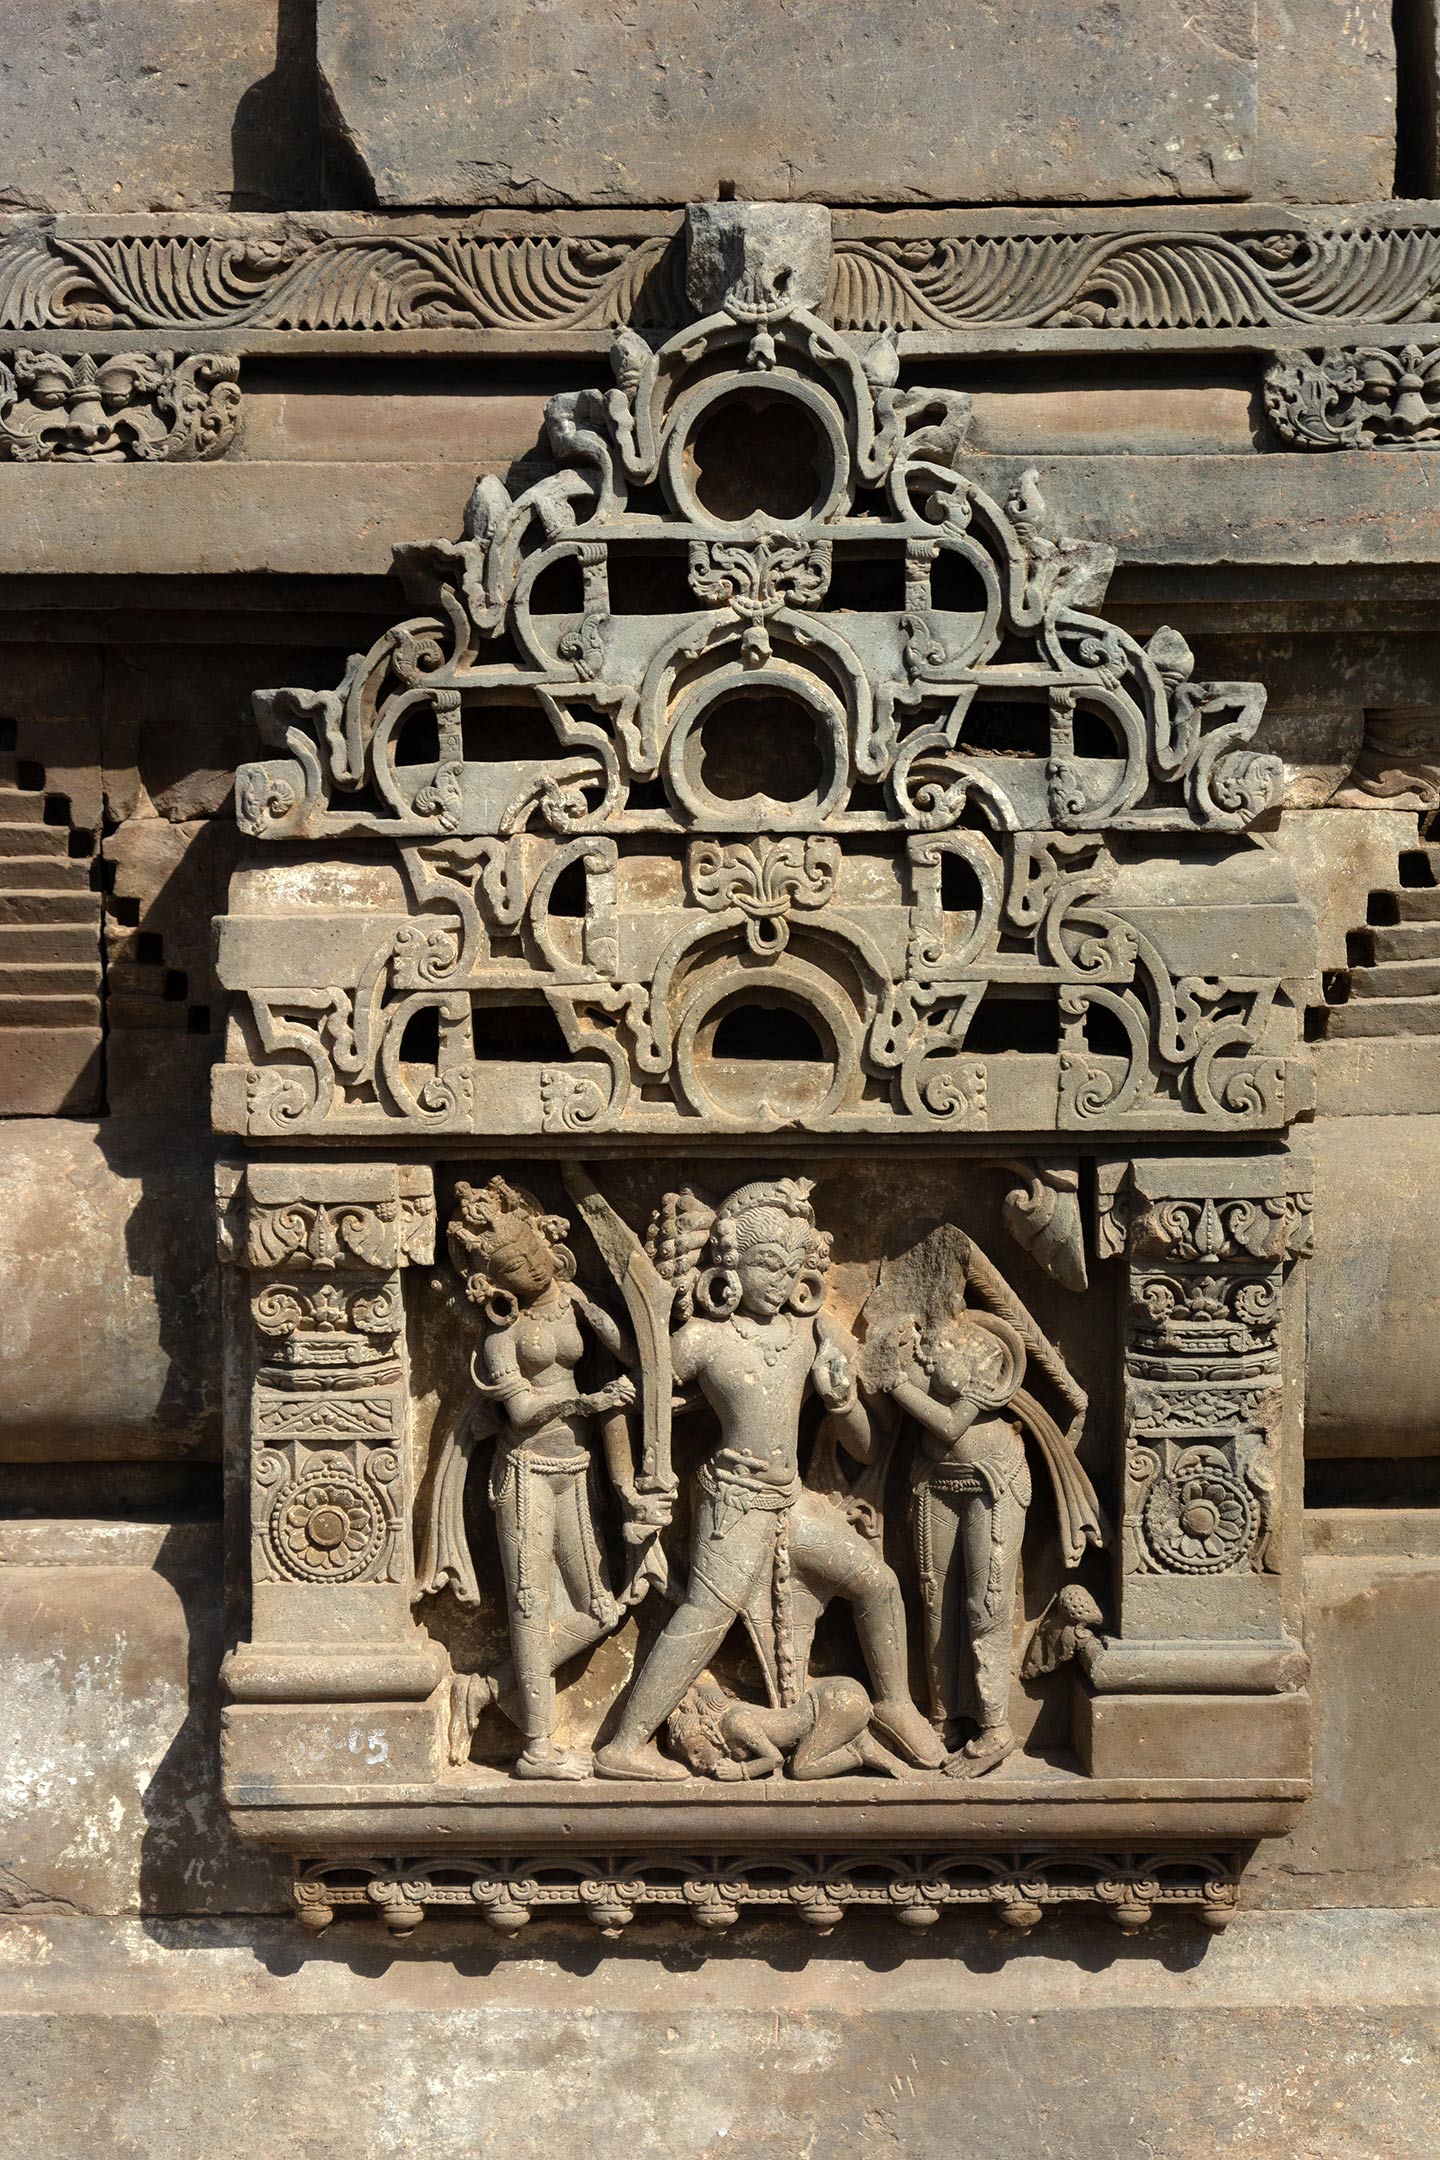 This panel depicts a warrior invoking raudram rasa (fury/rage) by aggressively wielding a drawn sword. The central figure of a warrior-king is aggressively stepping forward wielding a naked sword in his right hand. A dagger is tucked into his kamarbandha (waist belt). The central female figure (seen on the left) may be a queen, who is trying to stop the man by pulling him behind.